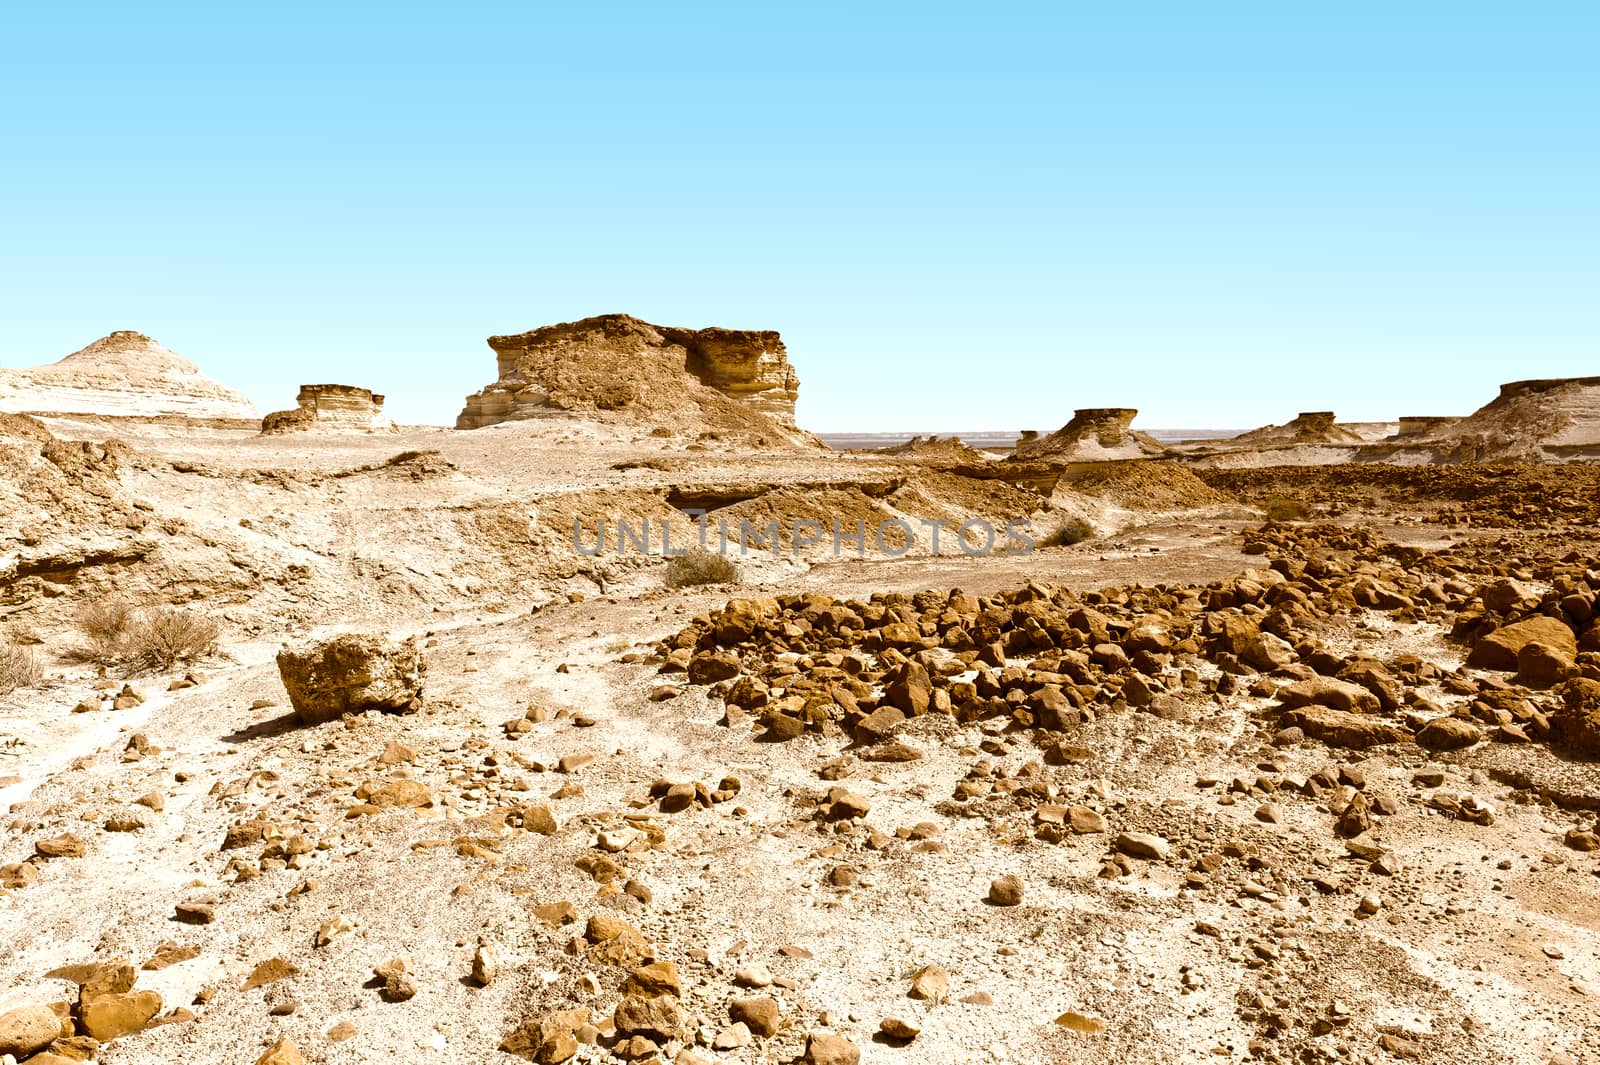 Stony Canyon of the Negev Desert in Israel